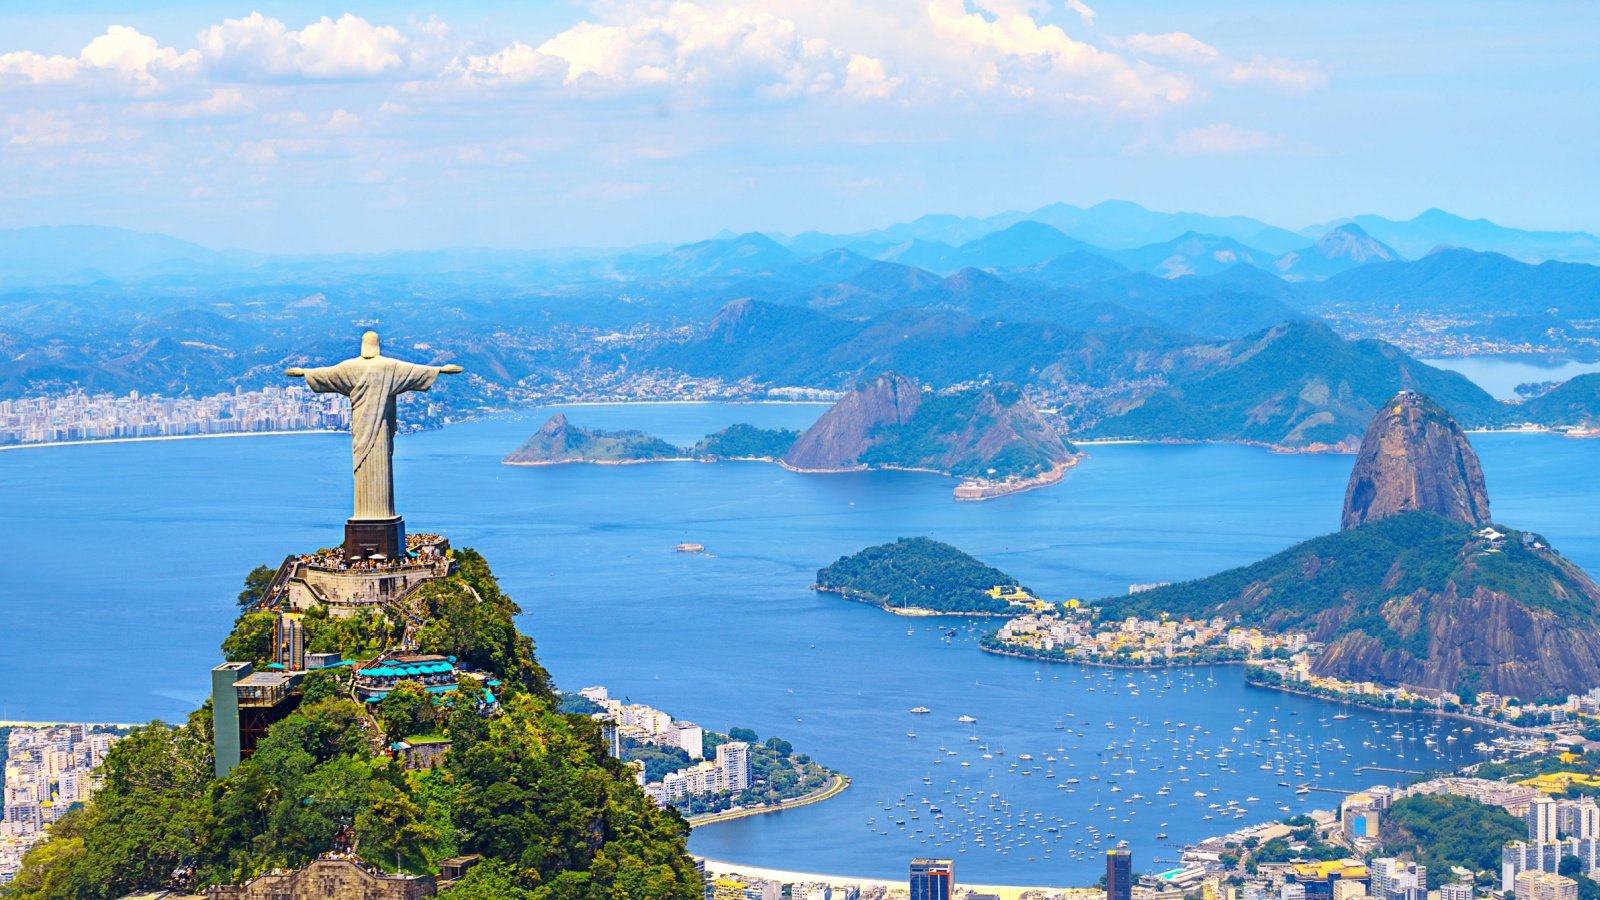 <p>Also known as “Cidade Maravilhosa,” the Marvelous City of Rio de Janeiro, is home to beautiful beaches, the world-famous Carnival, sumptuous mountain peaks, and the Samba. Be sure to see Christ the Redeemer, Sugarloaf Mountain, the Santa Teresa neighborhood, and Copacabana Beach.</p><p>Shaped by Afro-Brazilian culture, Salvador is the capital of the Bahia region, which sits on the Atlantic Coast. Salvador has a fascinating history that has influenced its food, architecture, and music. Explore its cobblestoned streets and colonial buildings and be on the lookout for opportunities to dance to Samba music. If city sightseeing isn’t what you’re looking for, visit Iguazu Falls to witness the massive waterfalls on Brazil and Argentina’s border.</p>